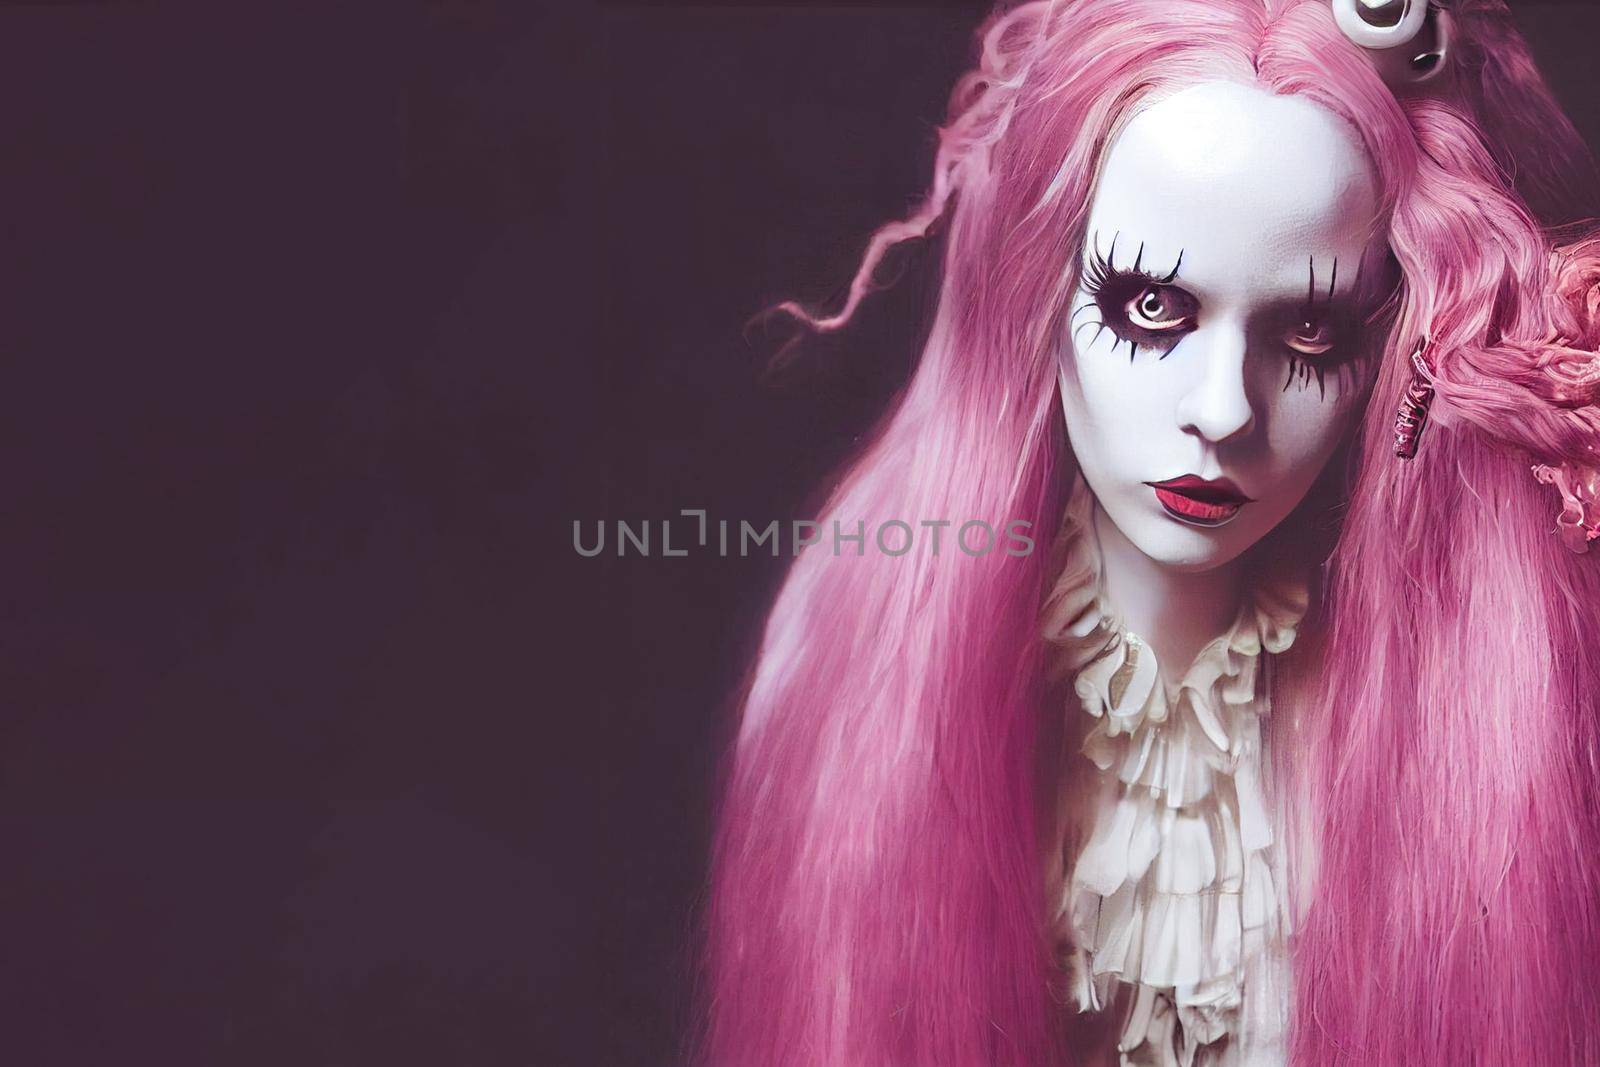 Spooky portrait pale white humanoid of a woman with light blonde and pink hair in halloween makeup. by FokasuArt